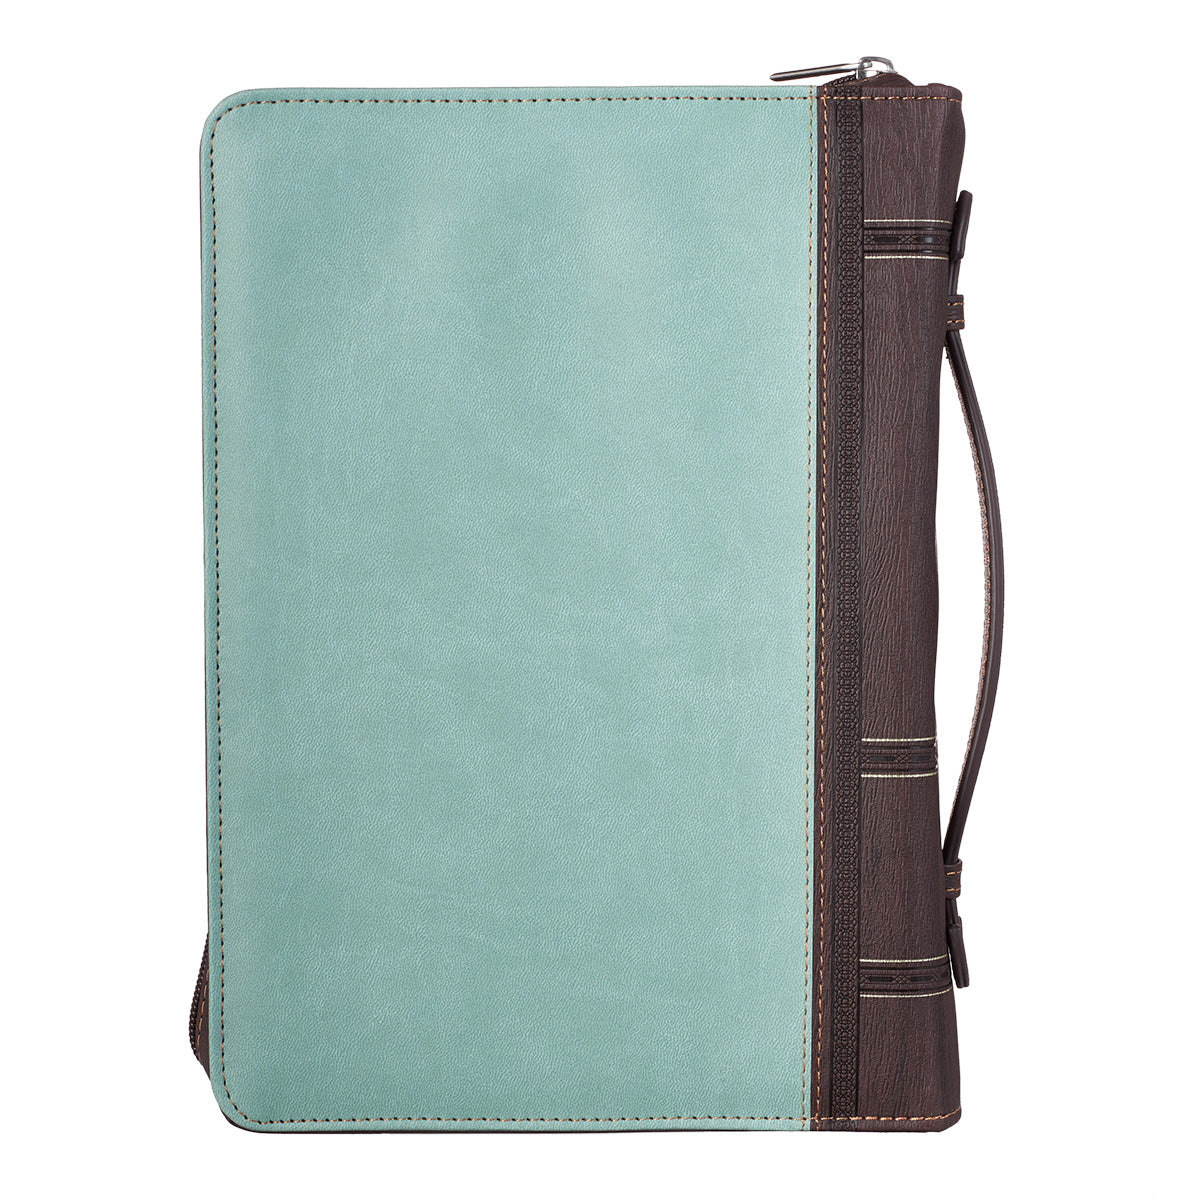 Blessed Light Blue Faux Leather Fashion Bible Cover - Luke 1:45 - The Christian Gift Company